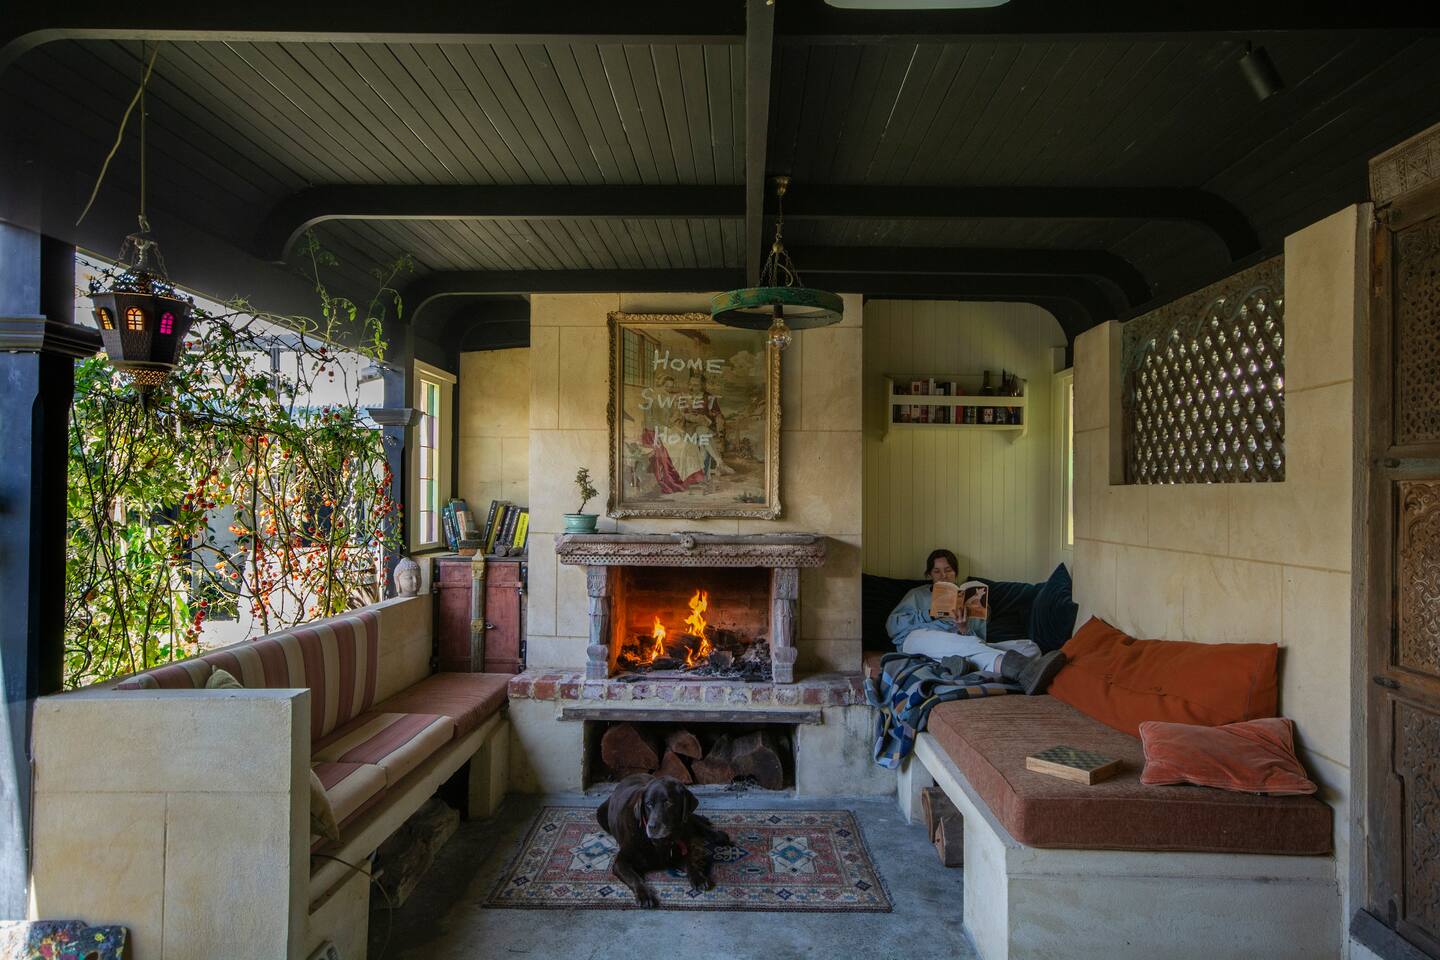 girl reads a book in an outdoor living room next to a fireplace